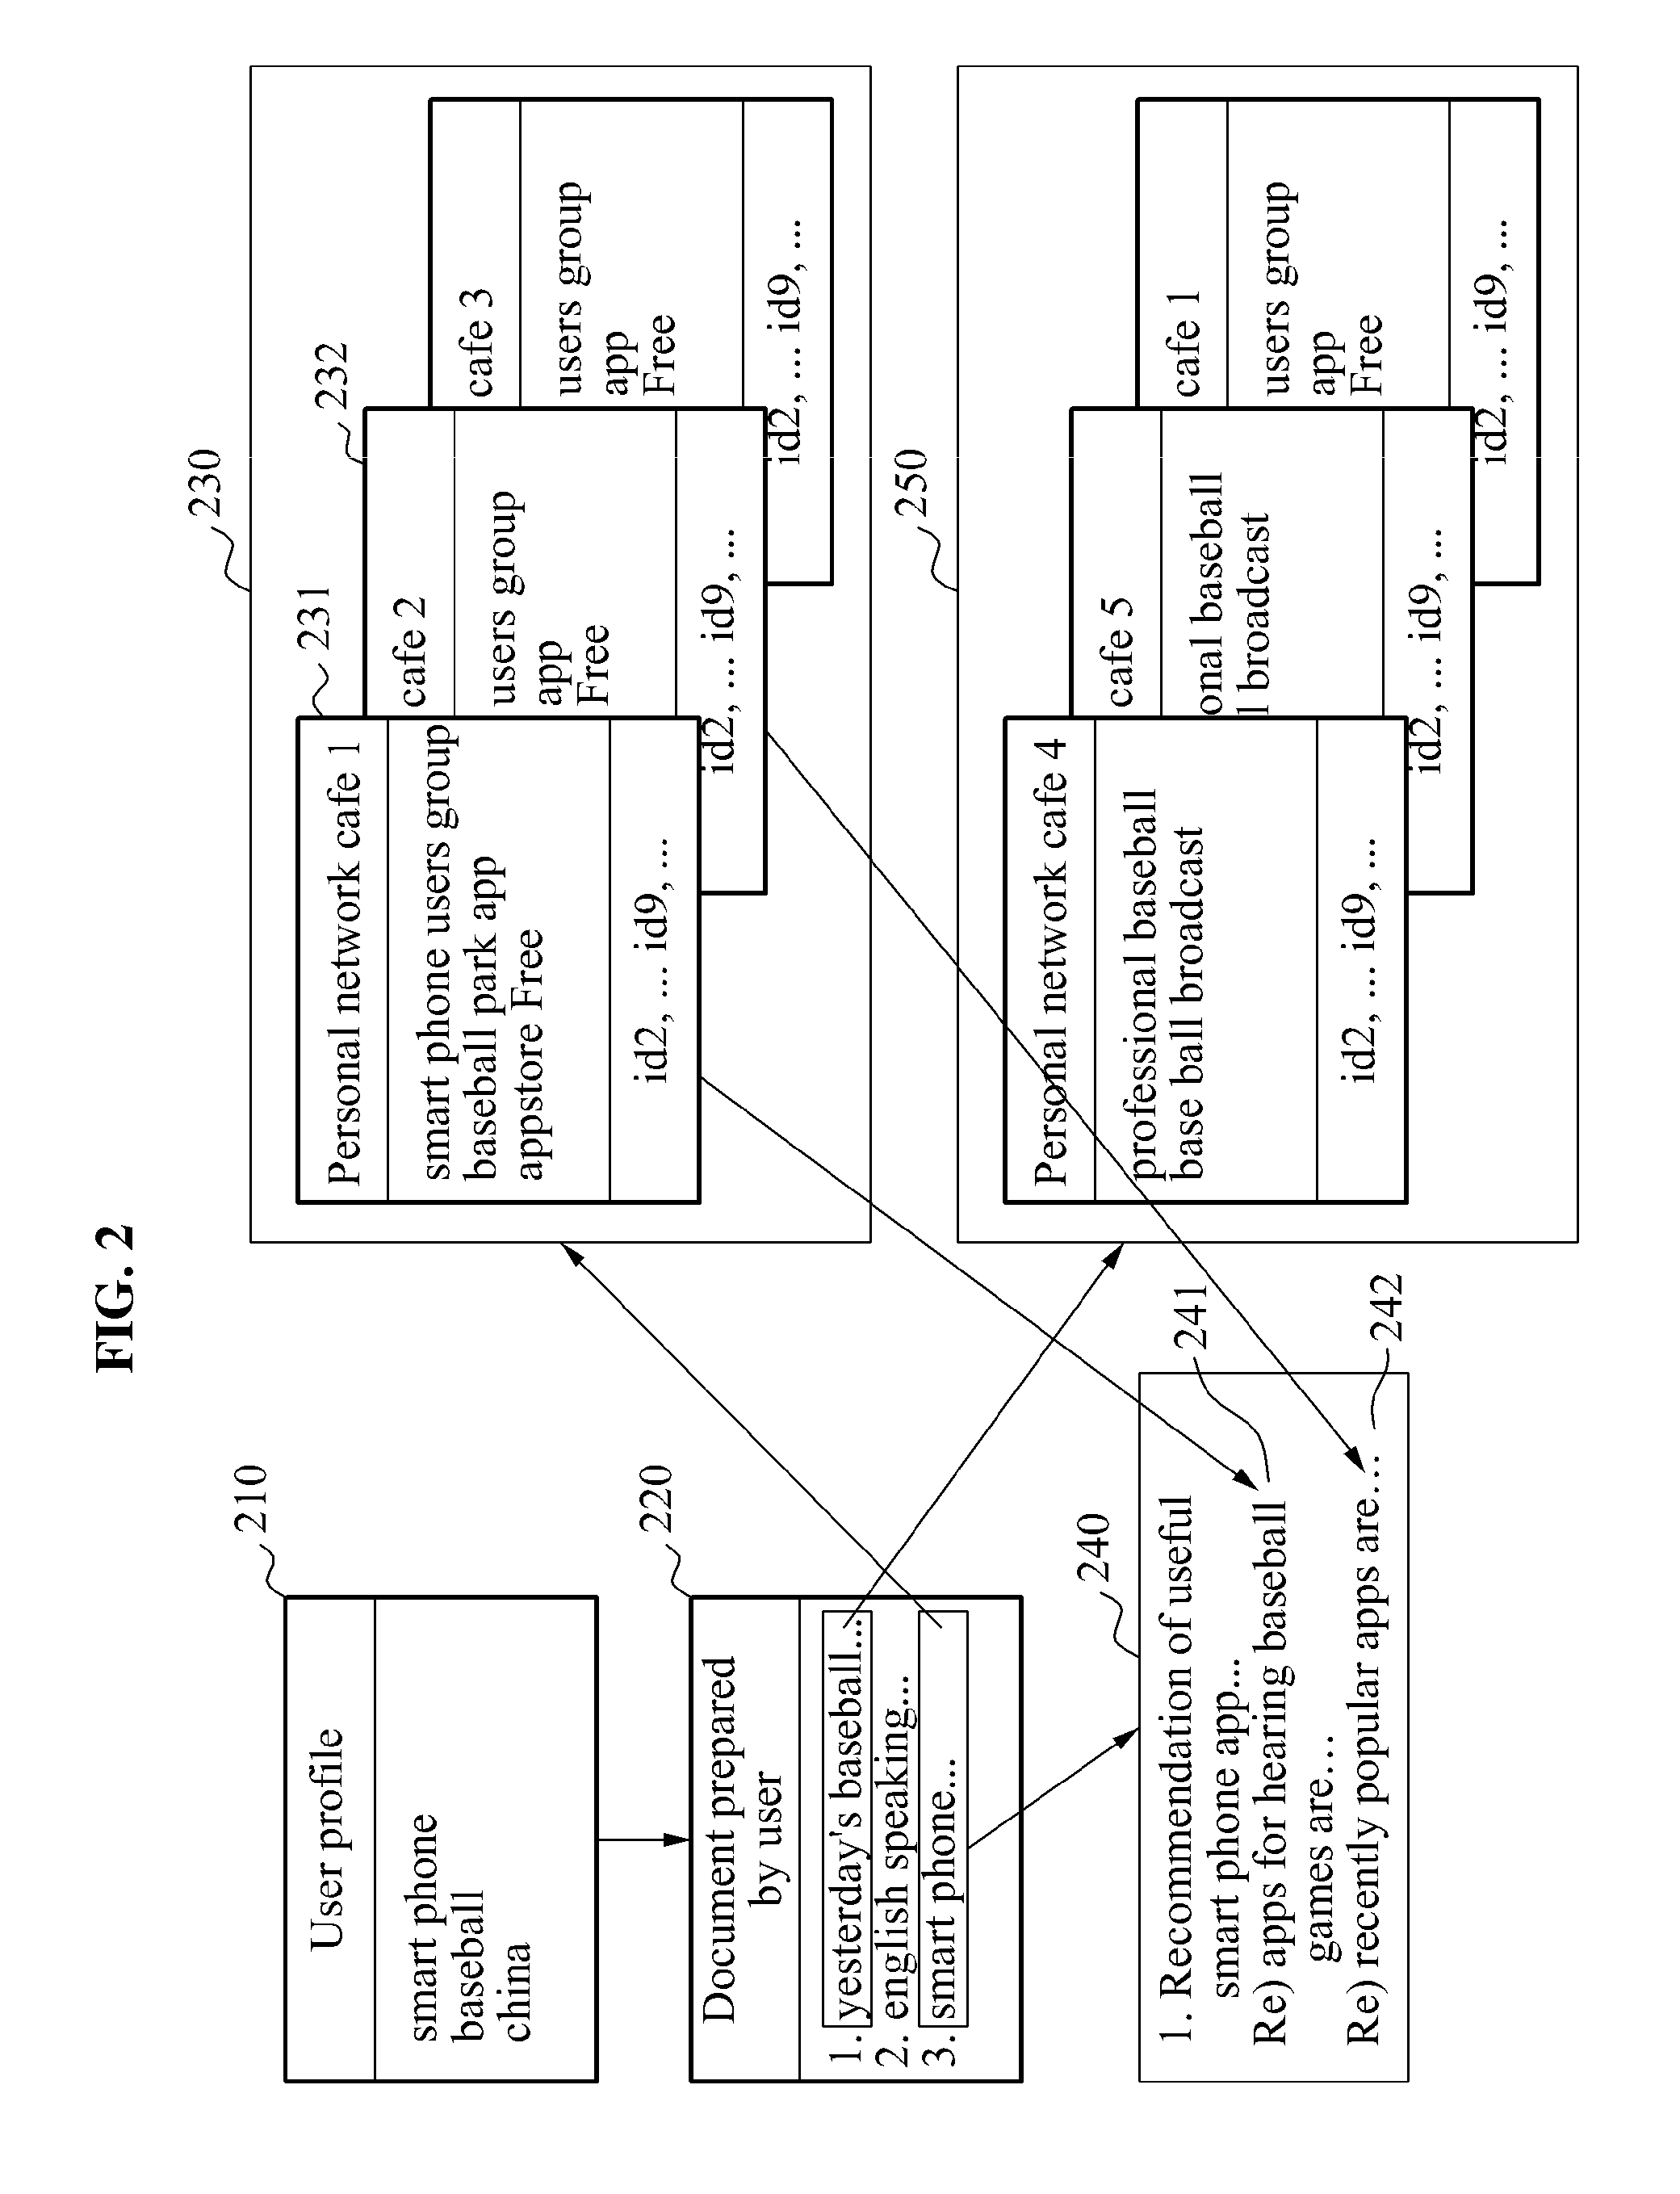 System and method for providing document based on personal network